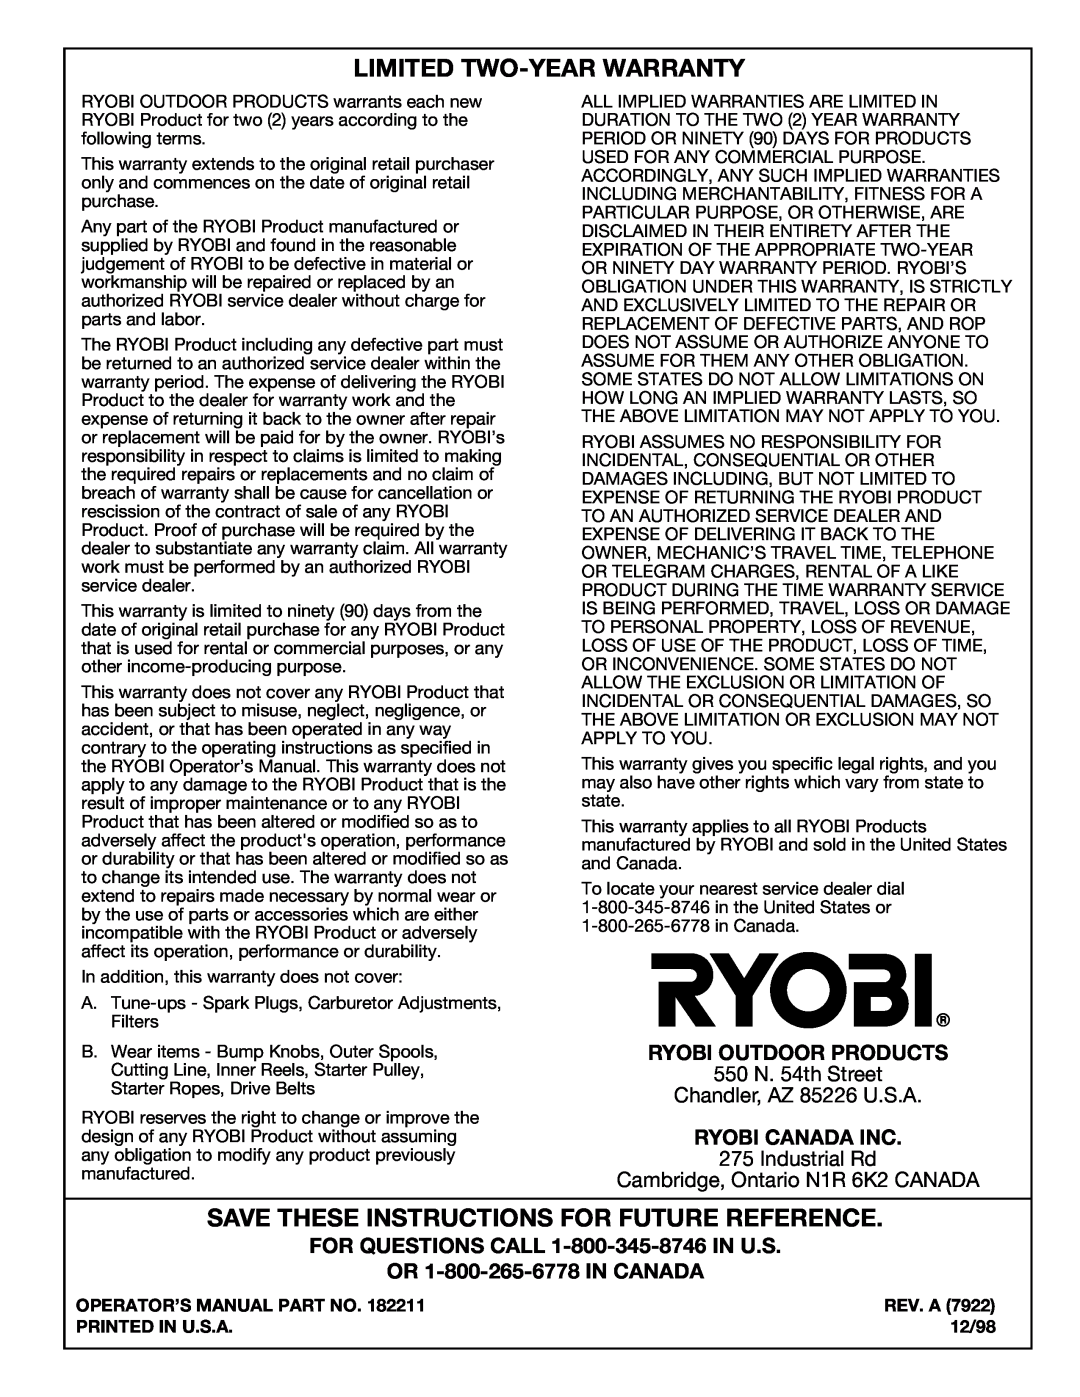 Ryobi 770rEB manual Limited Two-Year Warranty, Save These Instructions For Future Reference, Ryobi Outdoor Products, Rev. A 